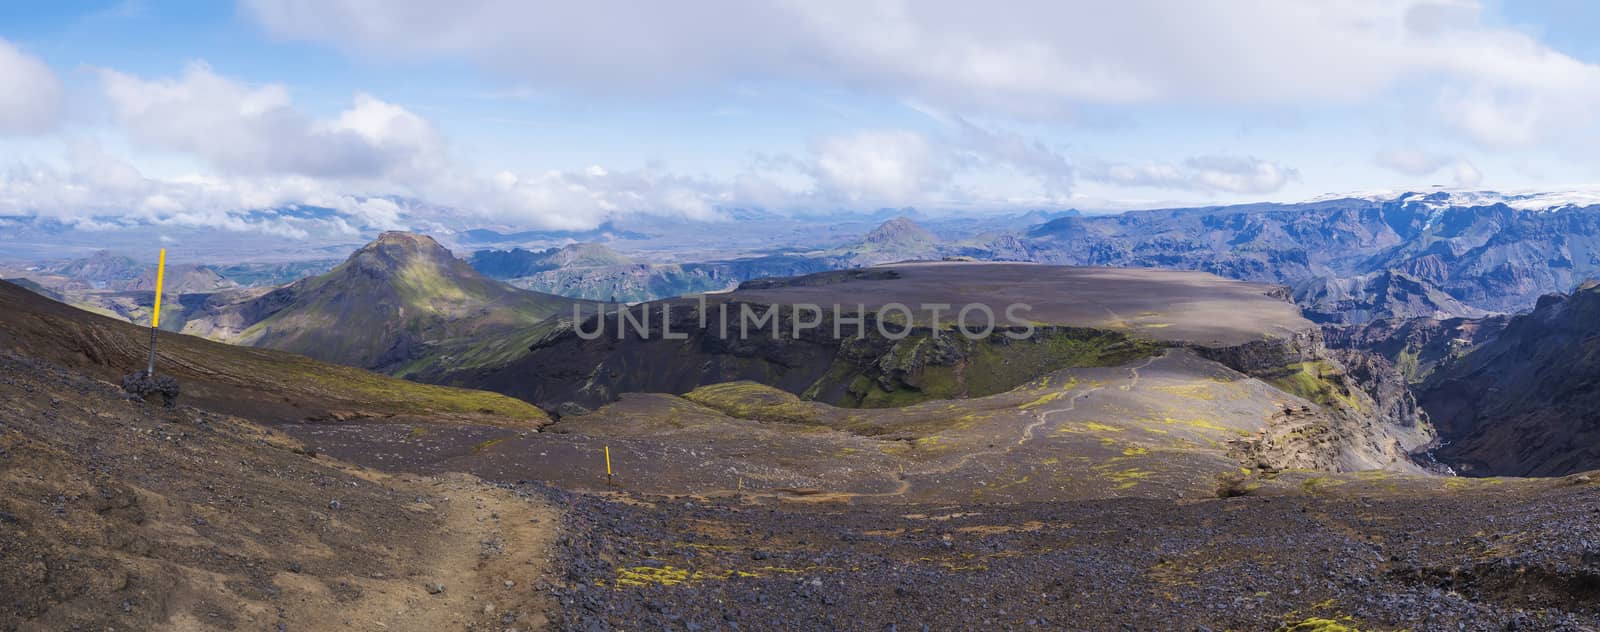 Panoramic breathtaking view on Landscape of Godland and thorsmork over plateau of Morinsheidi with rugged green moss covered rocks and hills. Iceland, Fimmvorduhals hiking trail. Summer cloudy day